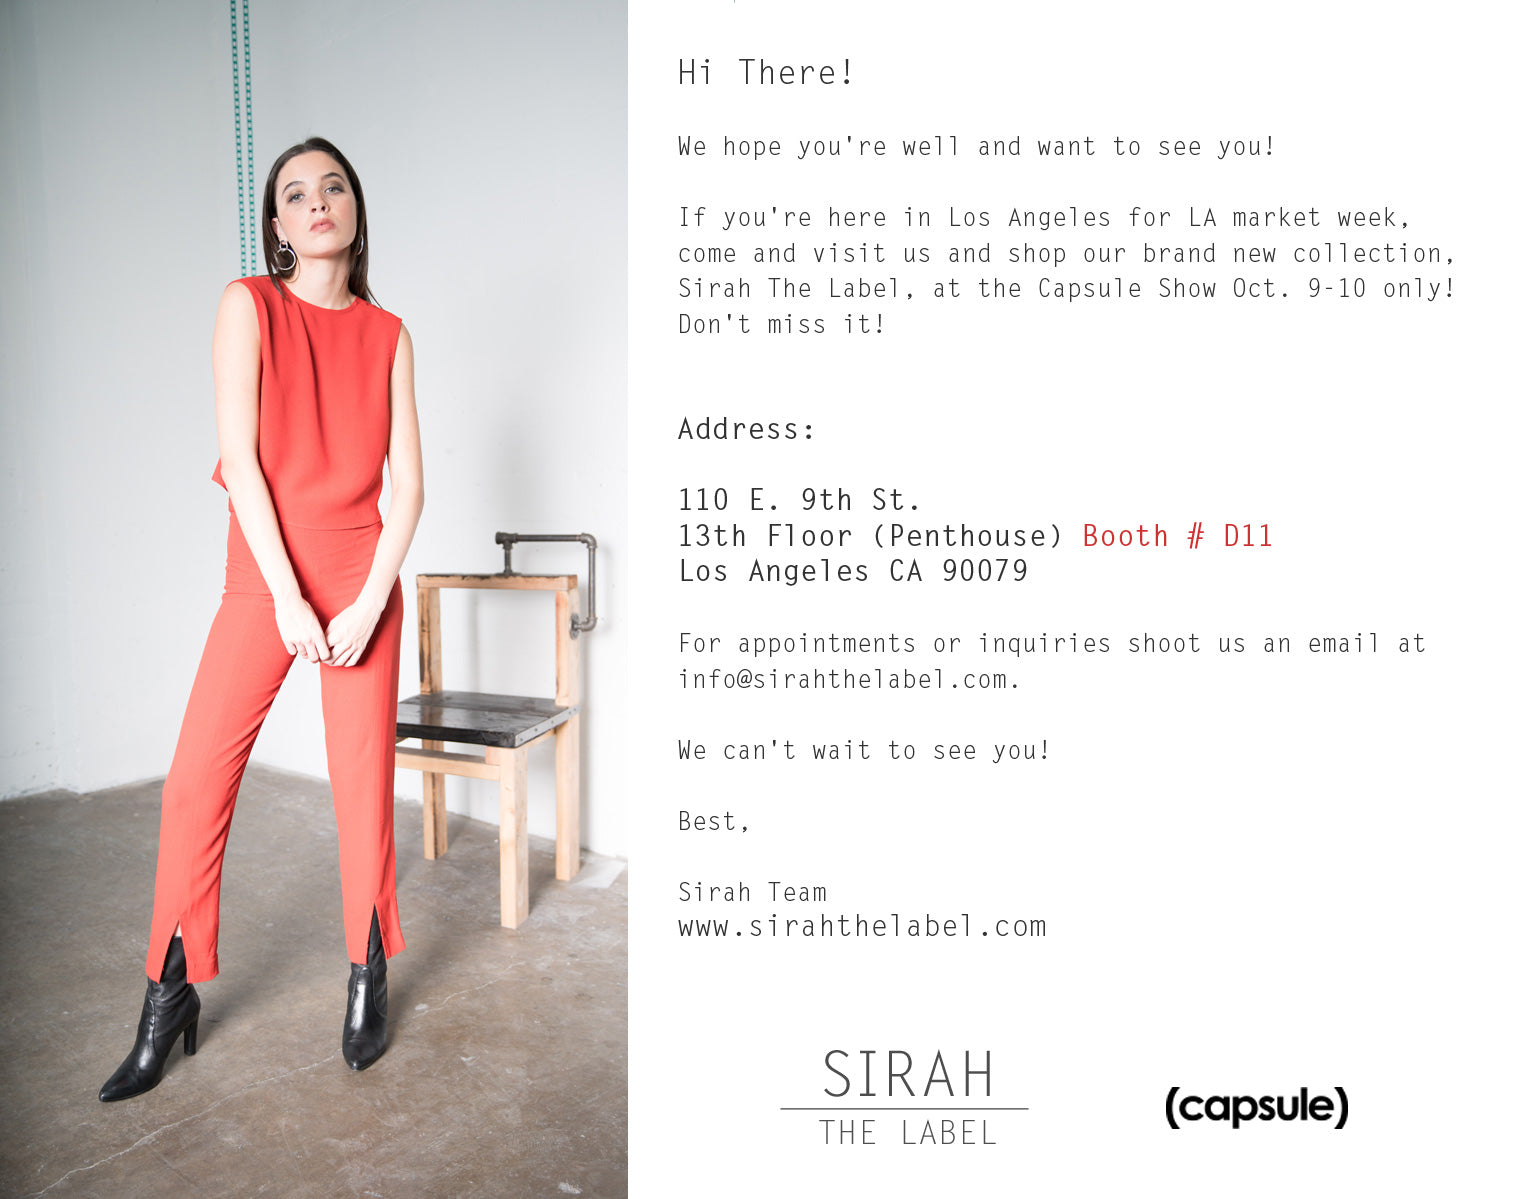 /blogs/the-world-of-sirah-the-label/hey-are-you-here-capsule-trade-show-women-s-ss18-la-invitation